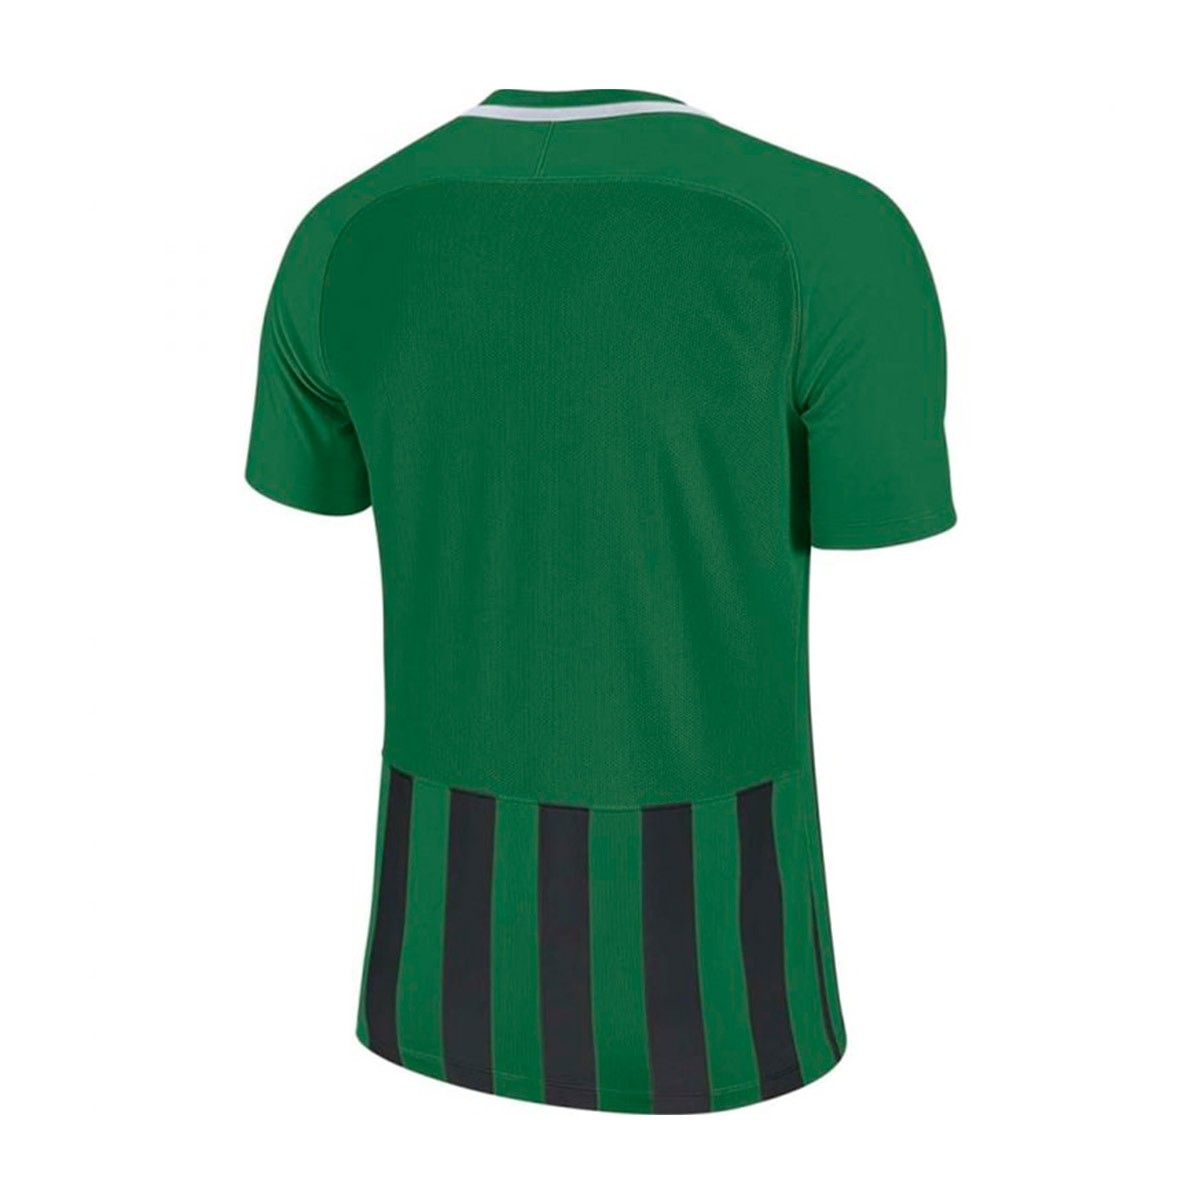 nike striped division ii jersey